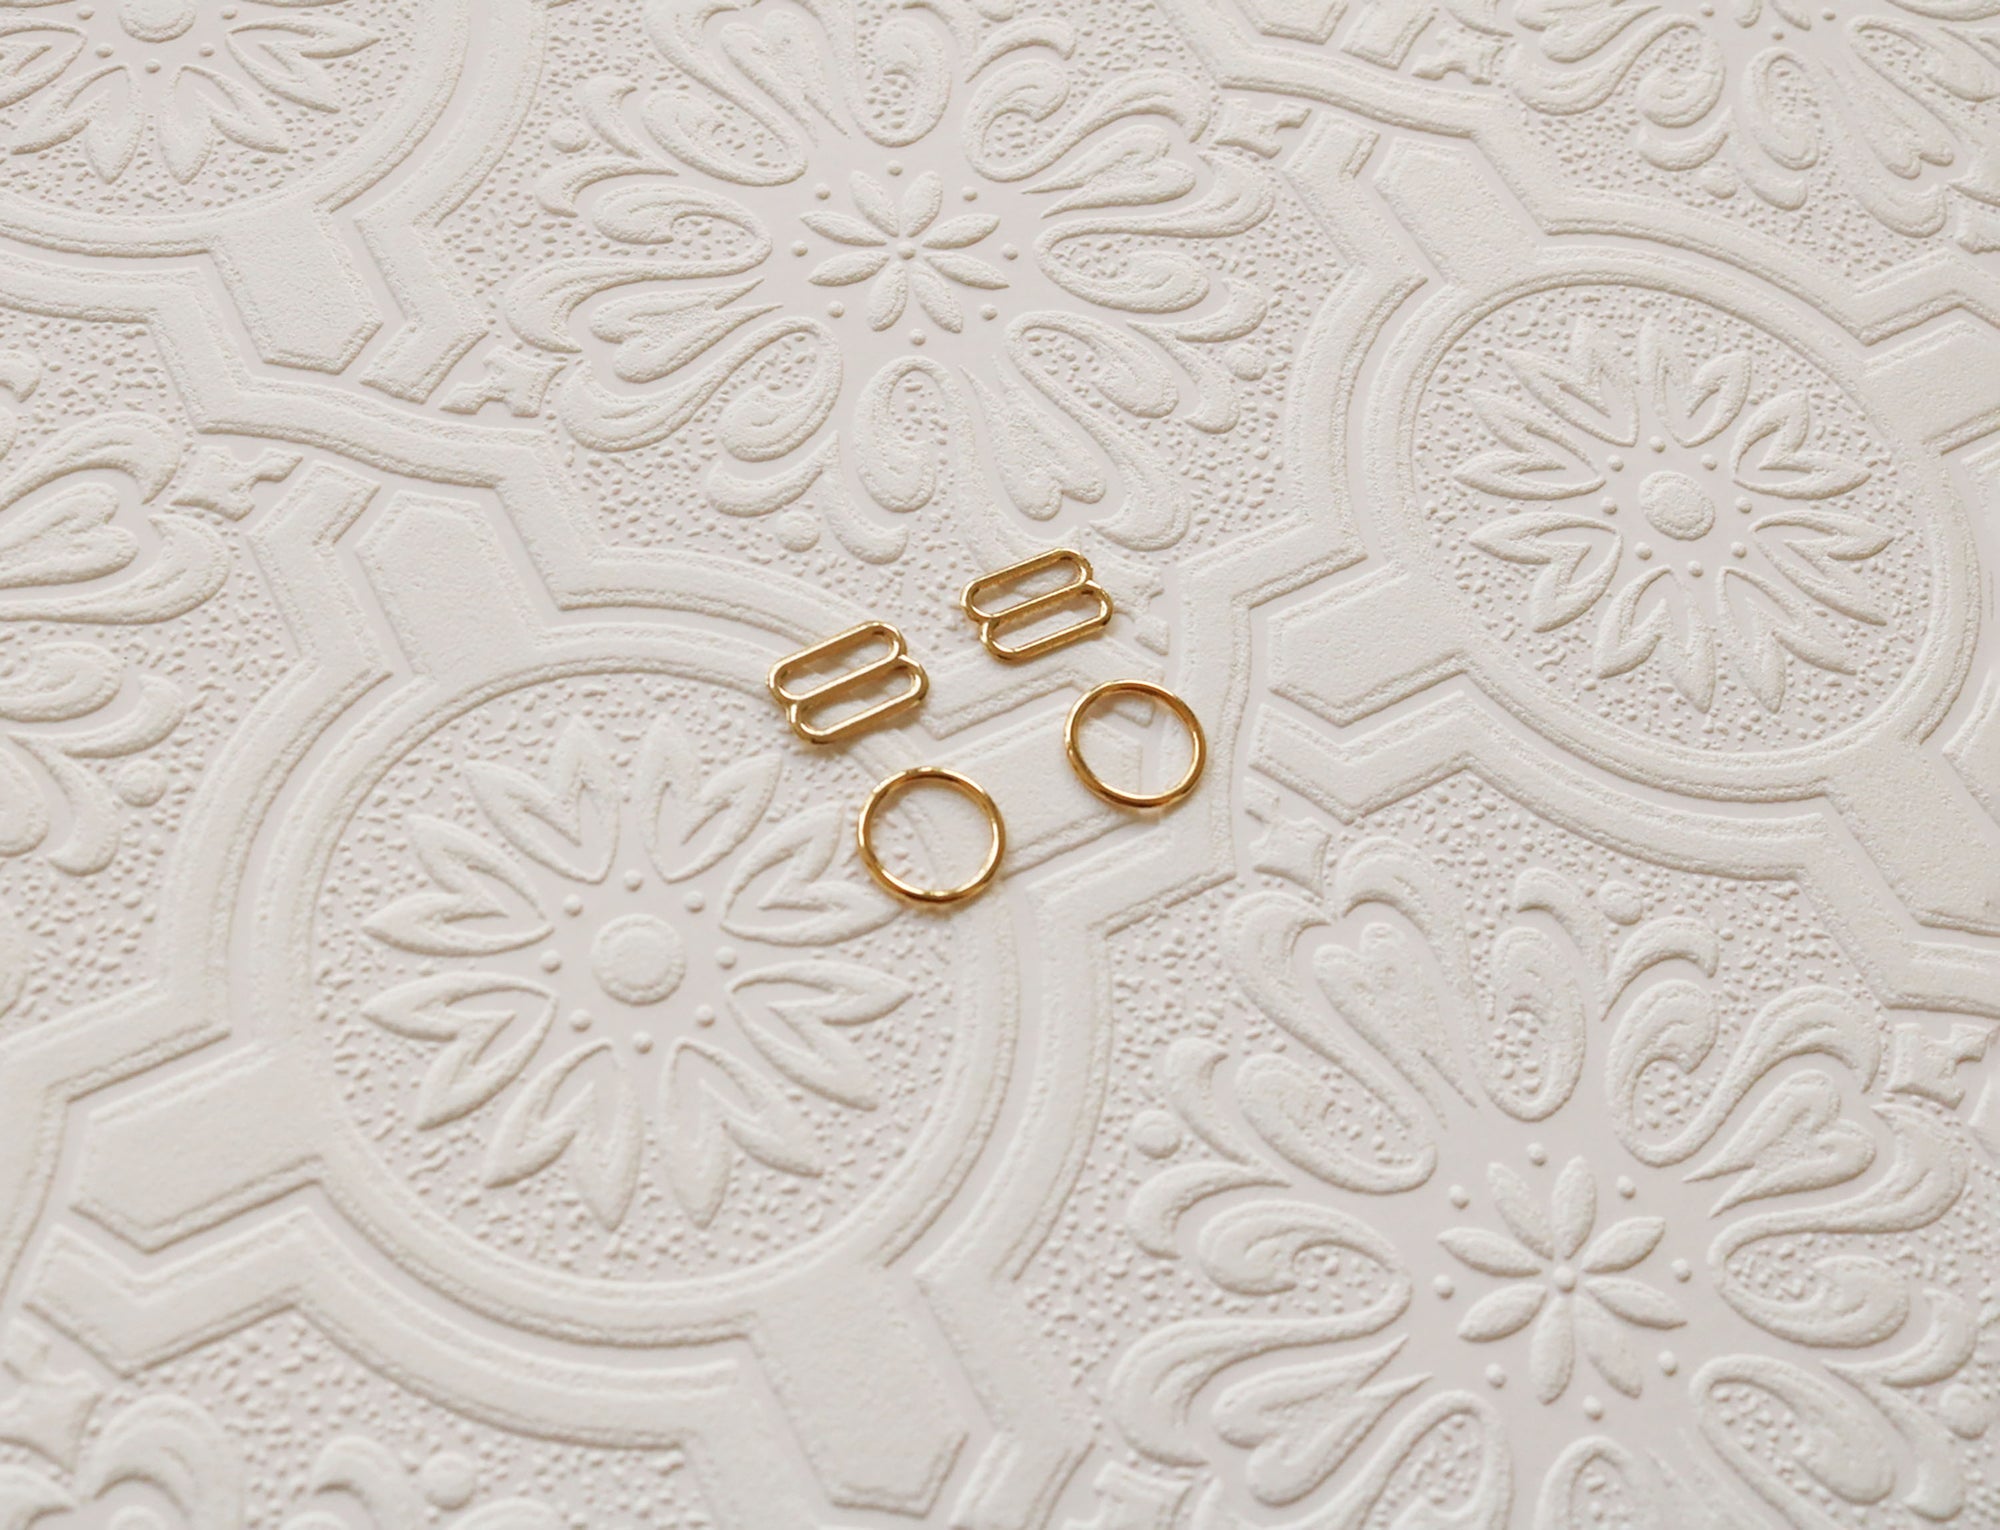 22K Gold-Plated Rings and Sliders for Bra Making, 1/2"